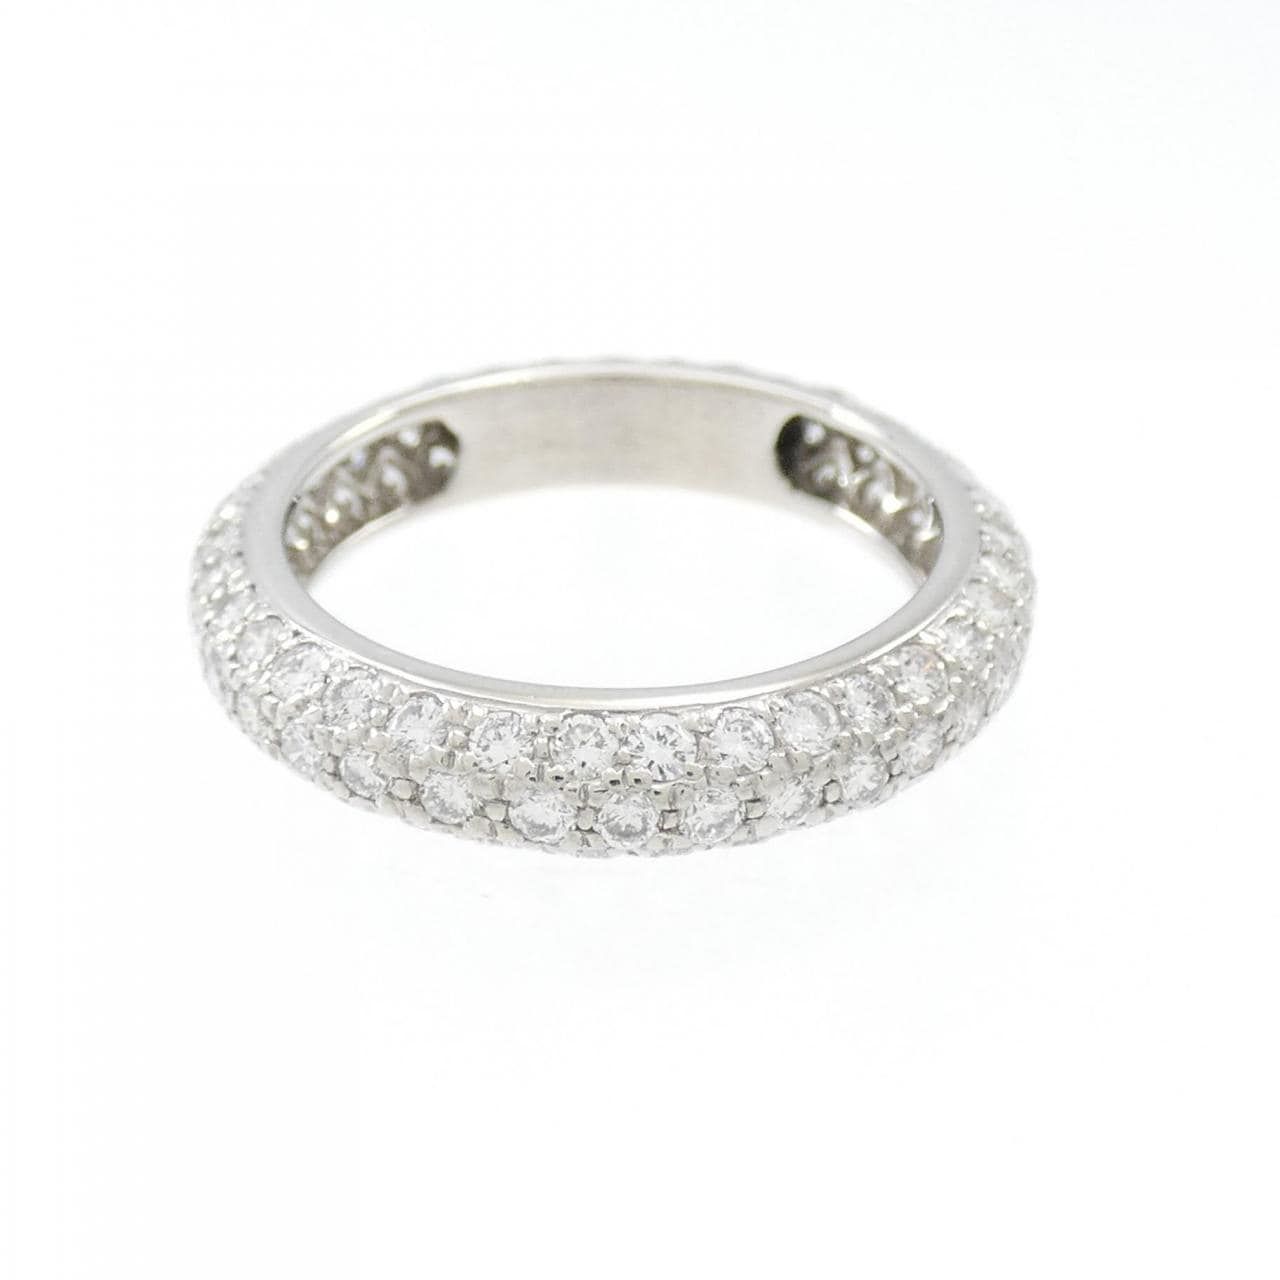 Cartier pave ring